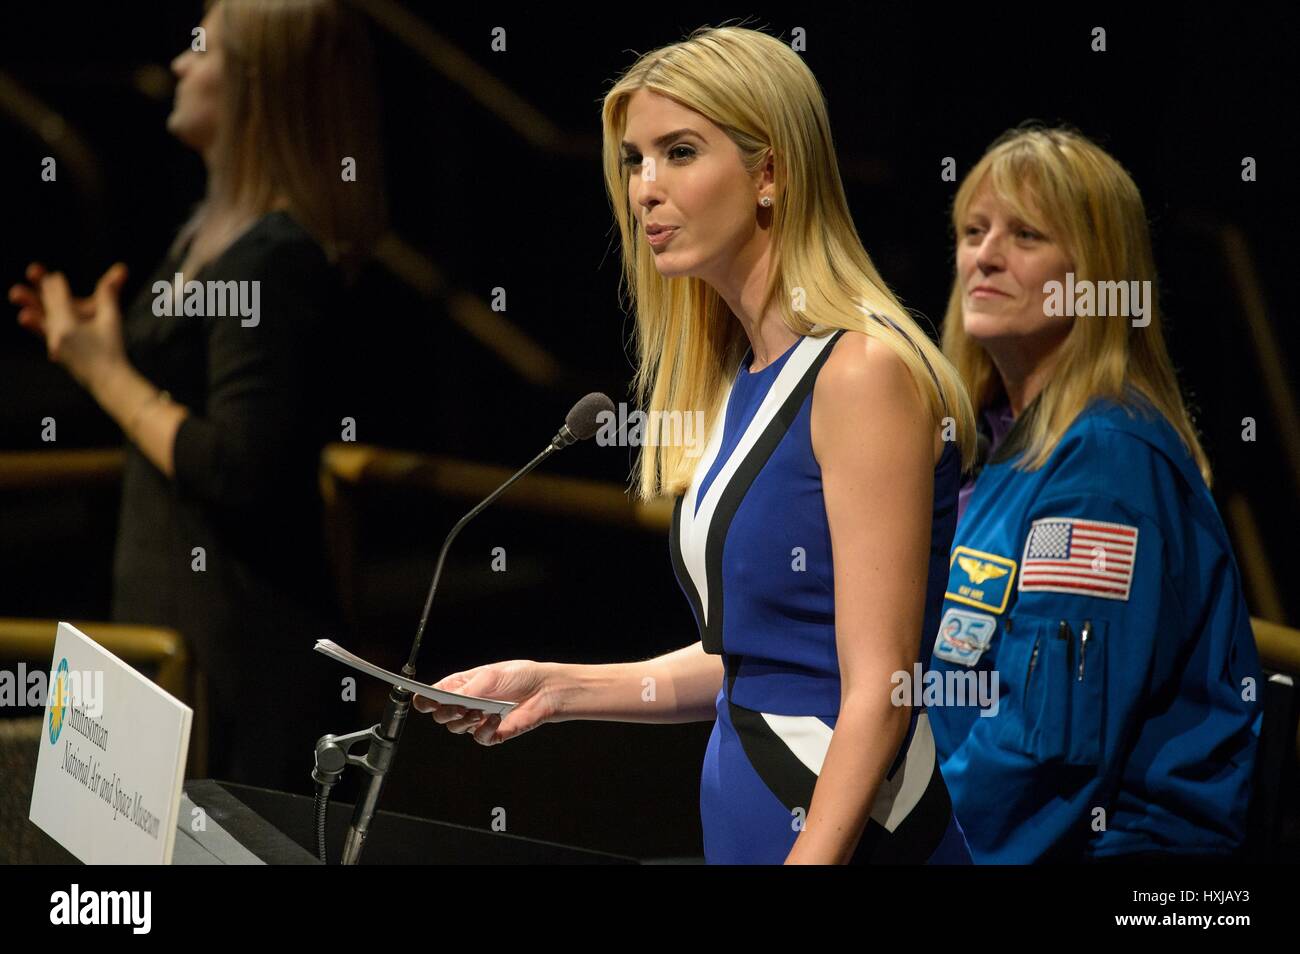 Washington, USA. 28th Mar, 2017. Ivanka Trump, daughter of U.S. President Donald Trump, delivers remarks during the women's history month celebration, getting excited about the STEM event at the Smithsonian National Air and Space Museum March 28, 2017 in Washington, DC. Credit: Planetpix/Alamy Live News Stock Photo